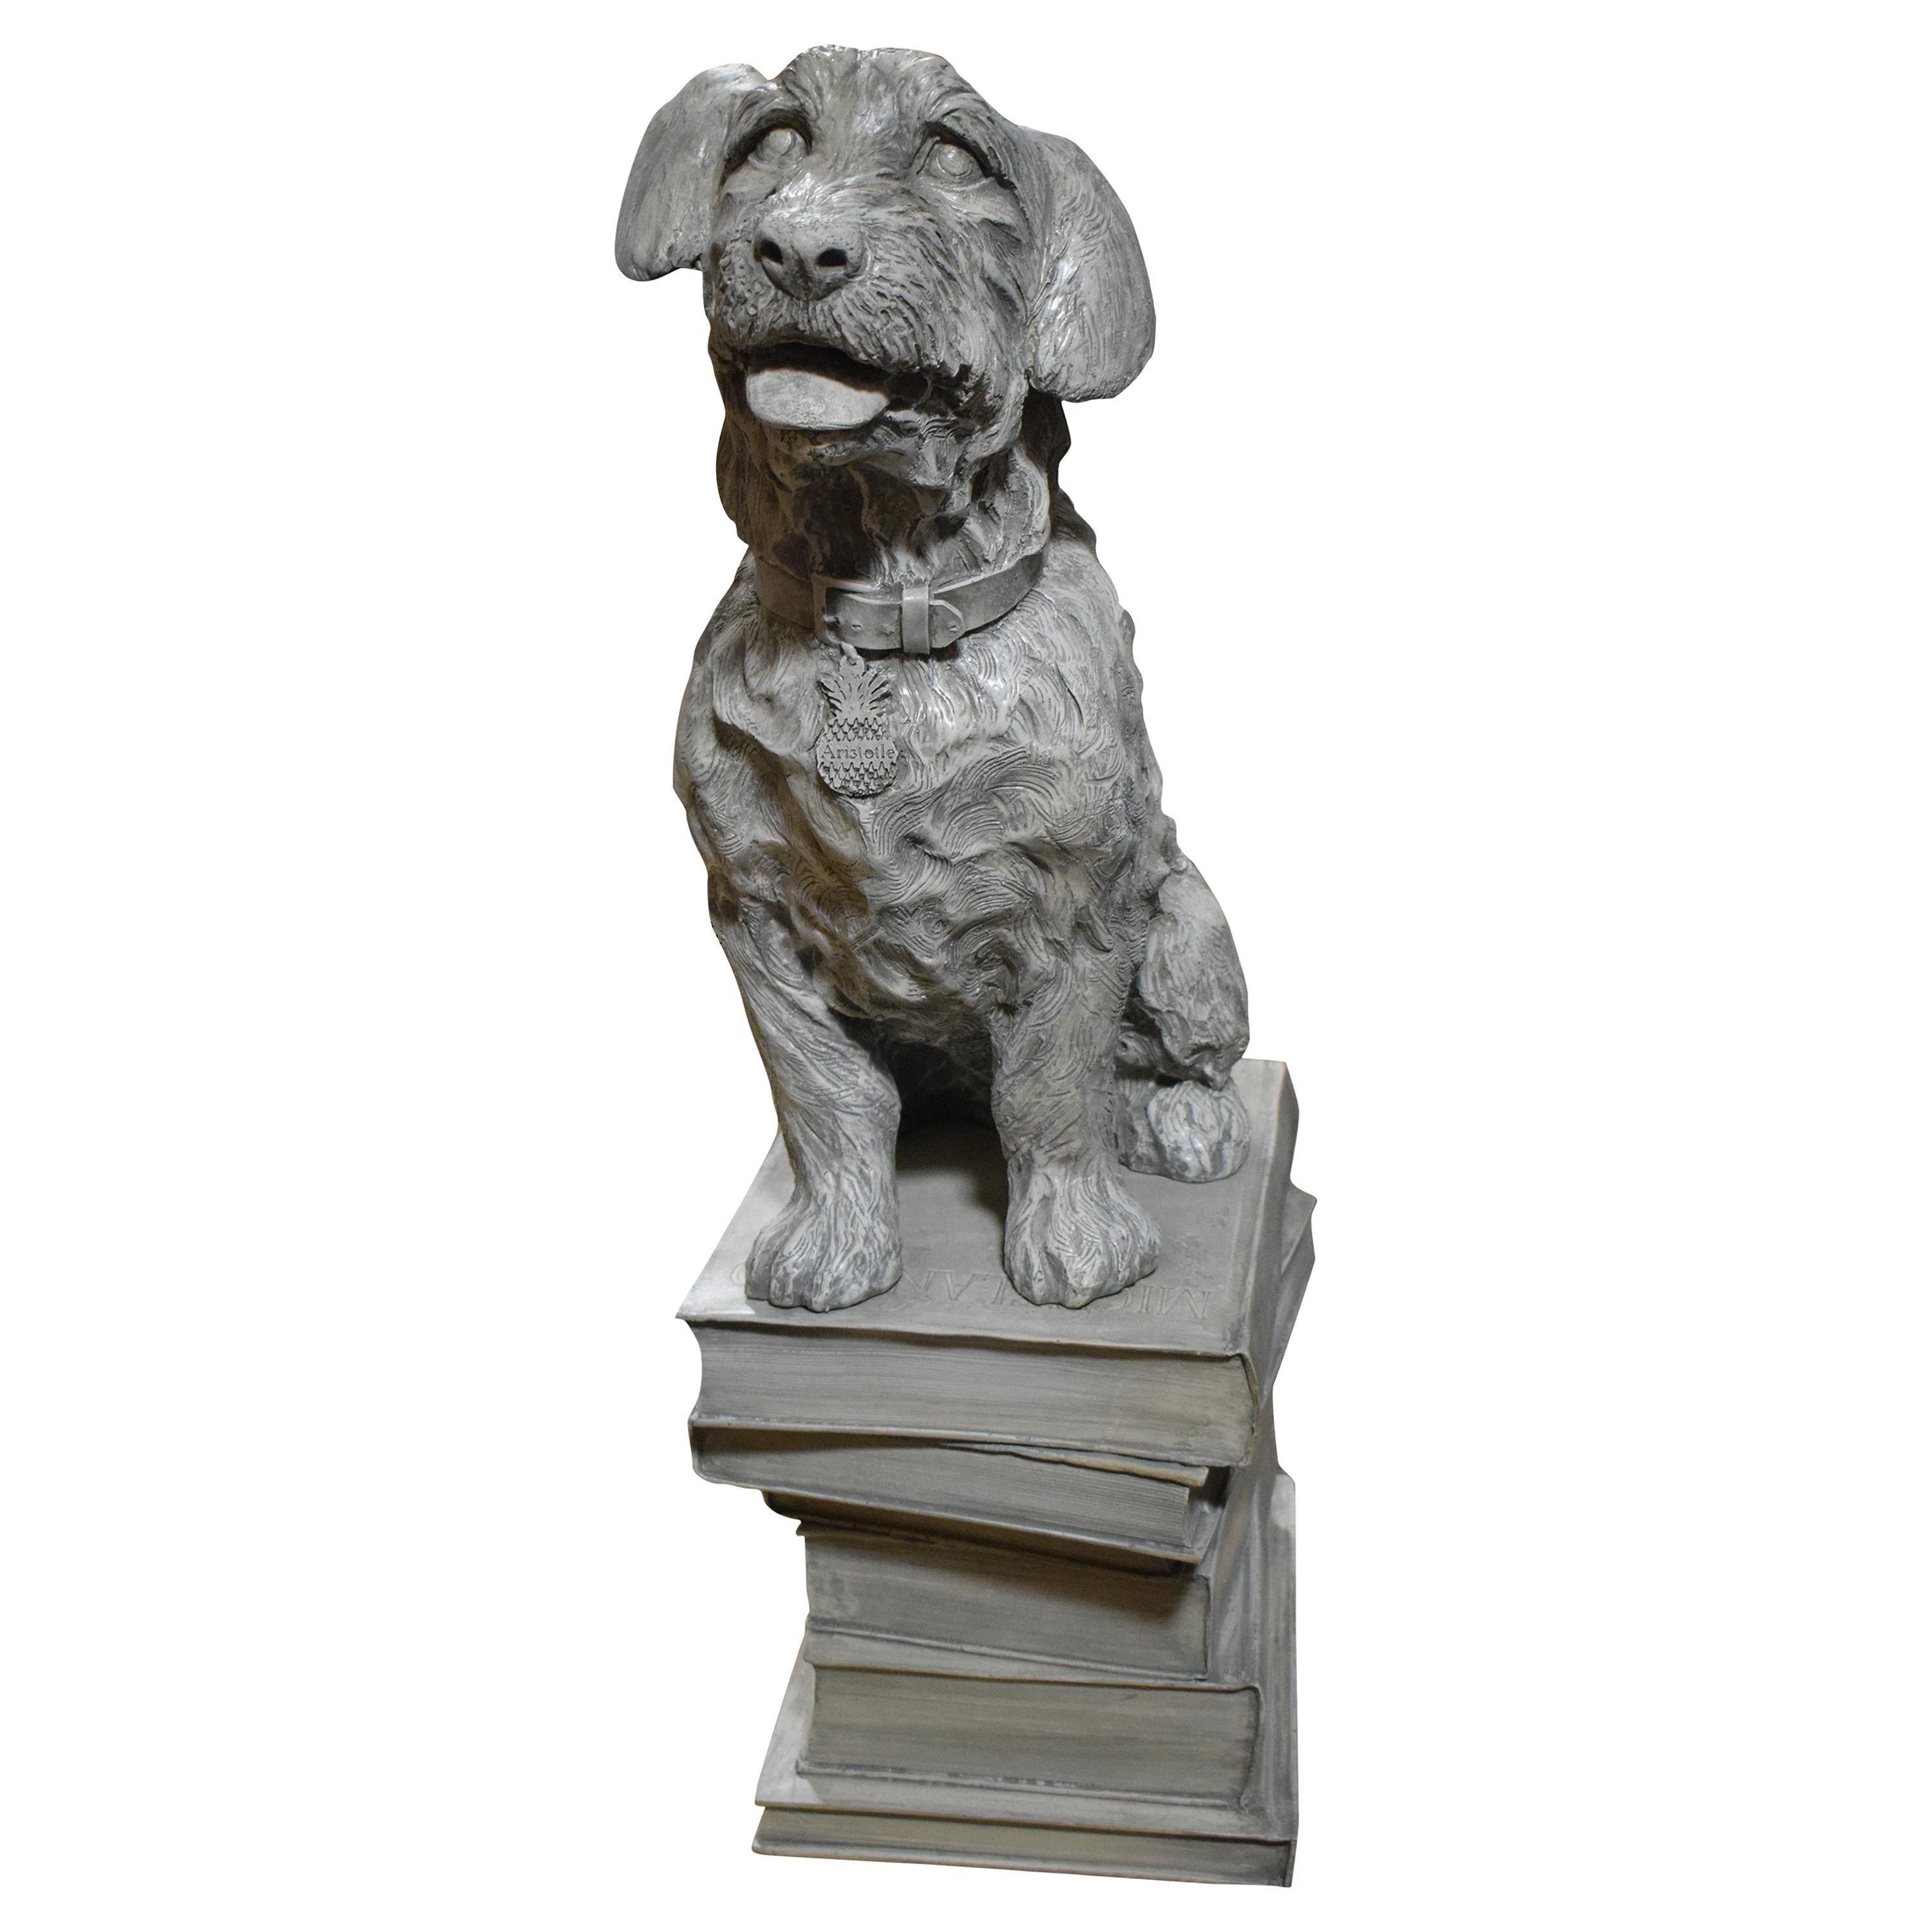 Highly Decorative Full Size Sculpture of a Dog Sitting on Books For Sale